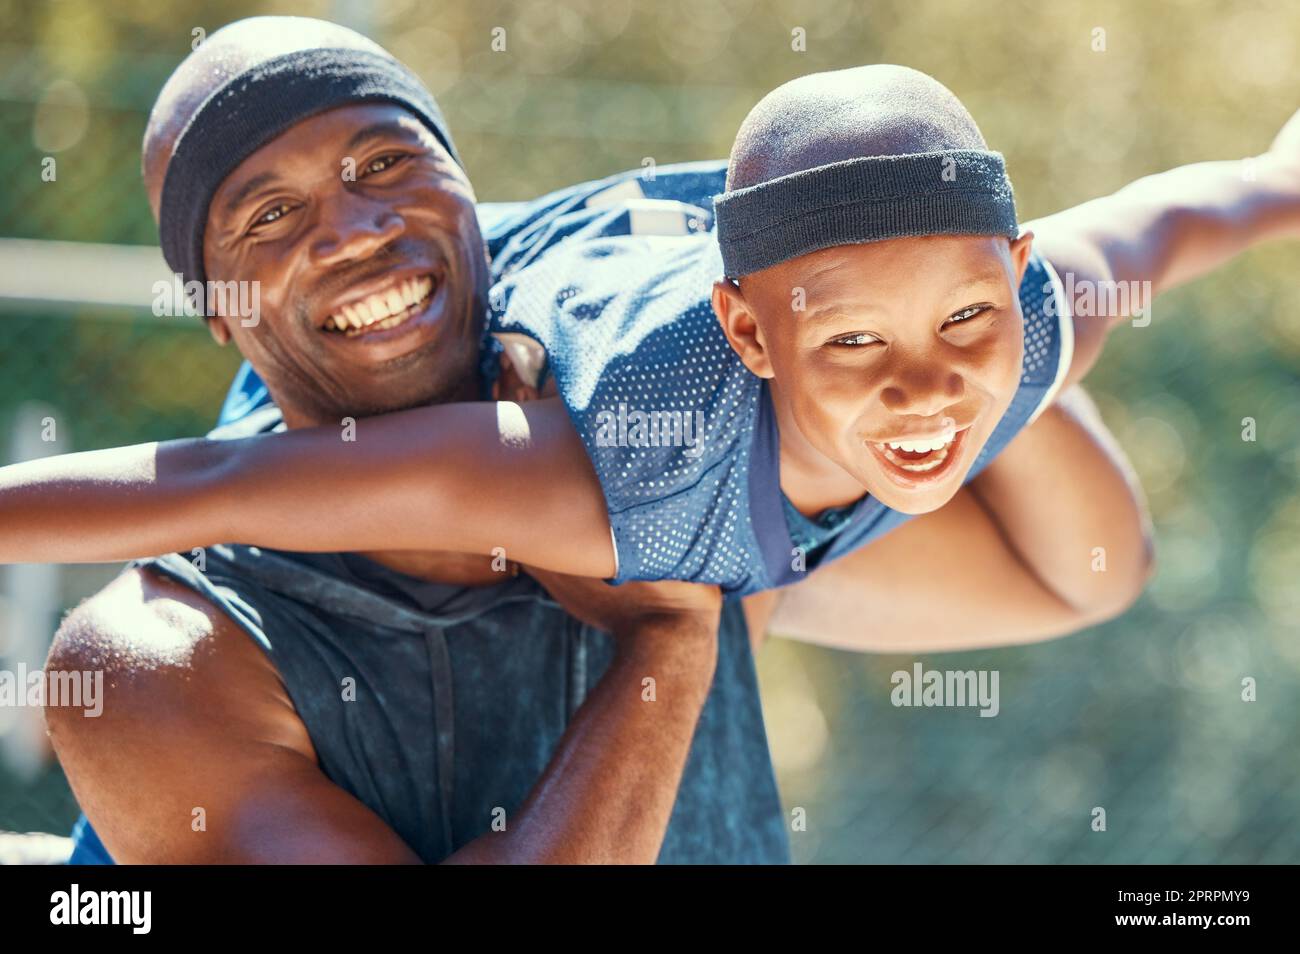 Black family, child or father on a basketball court while having fun and playing plane on a sunny day. Smile portrait of happy and excited kid with man sharing a special bond and close relationship Stock Photo